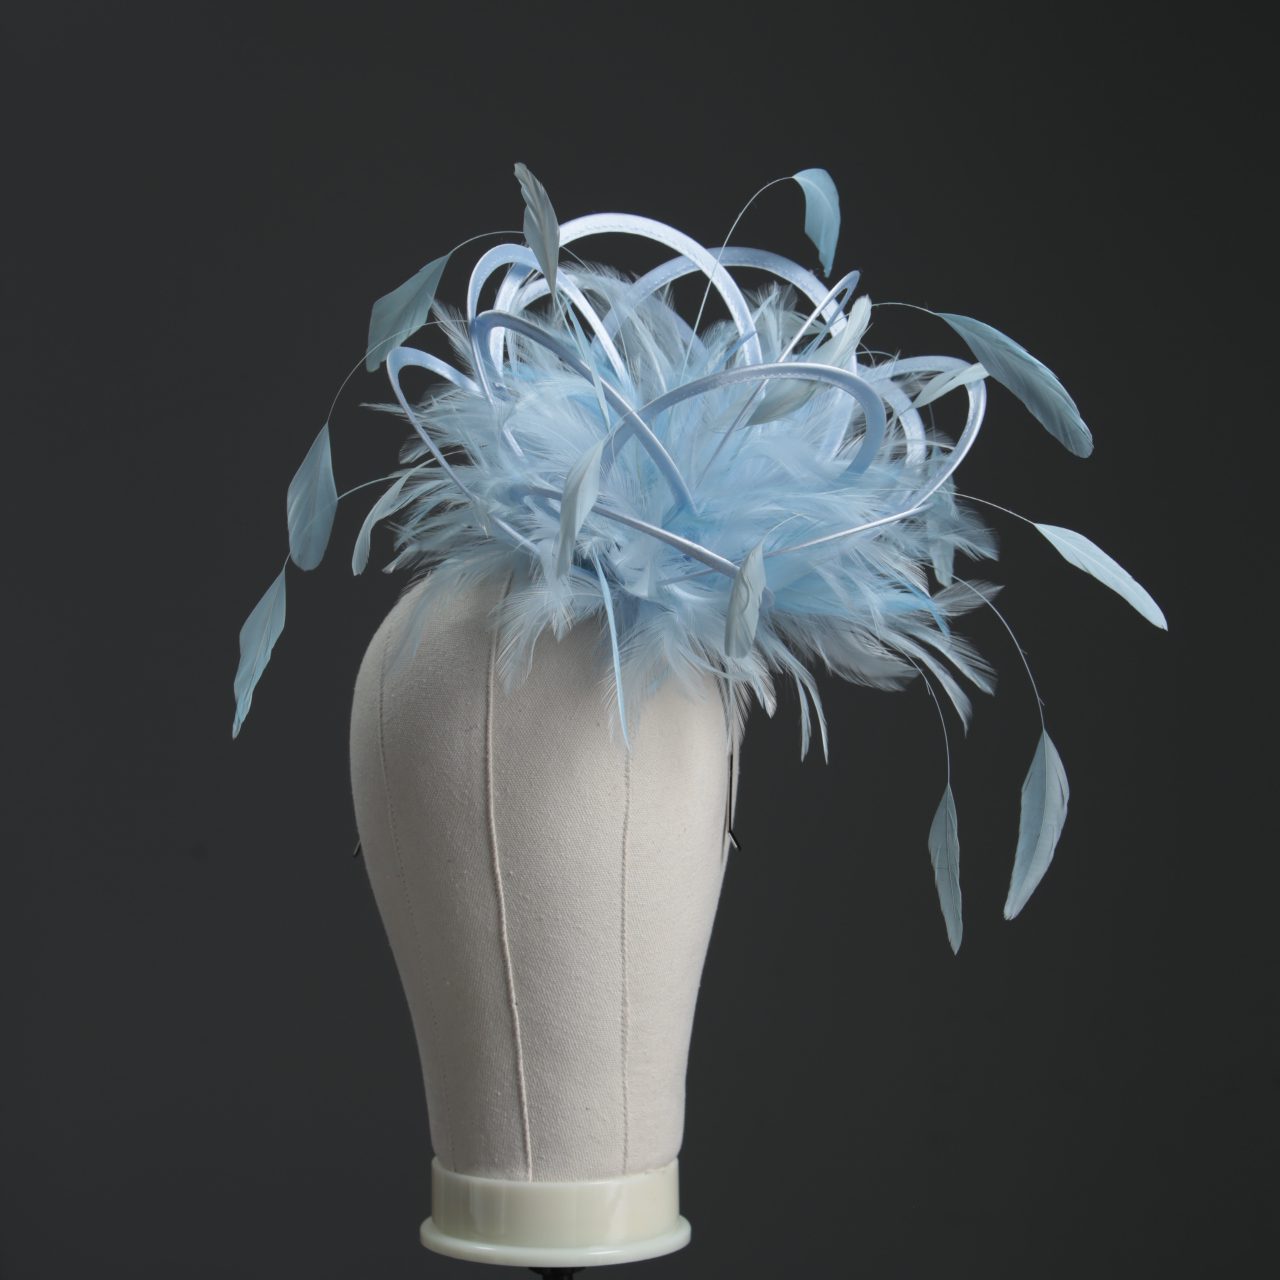 Ladies formal Baby blue medium feather and satin loop fascinator hat. Suitable for a wedding or ladies day at the races